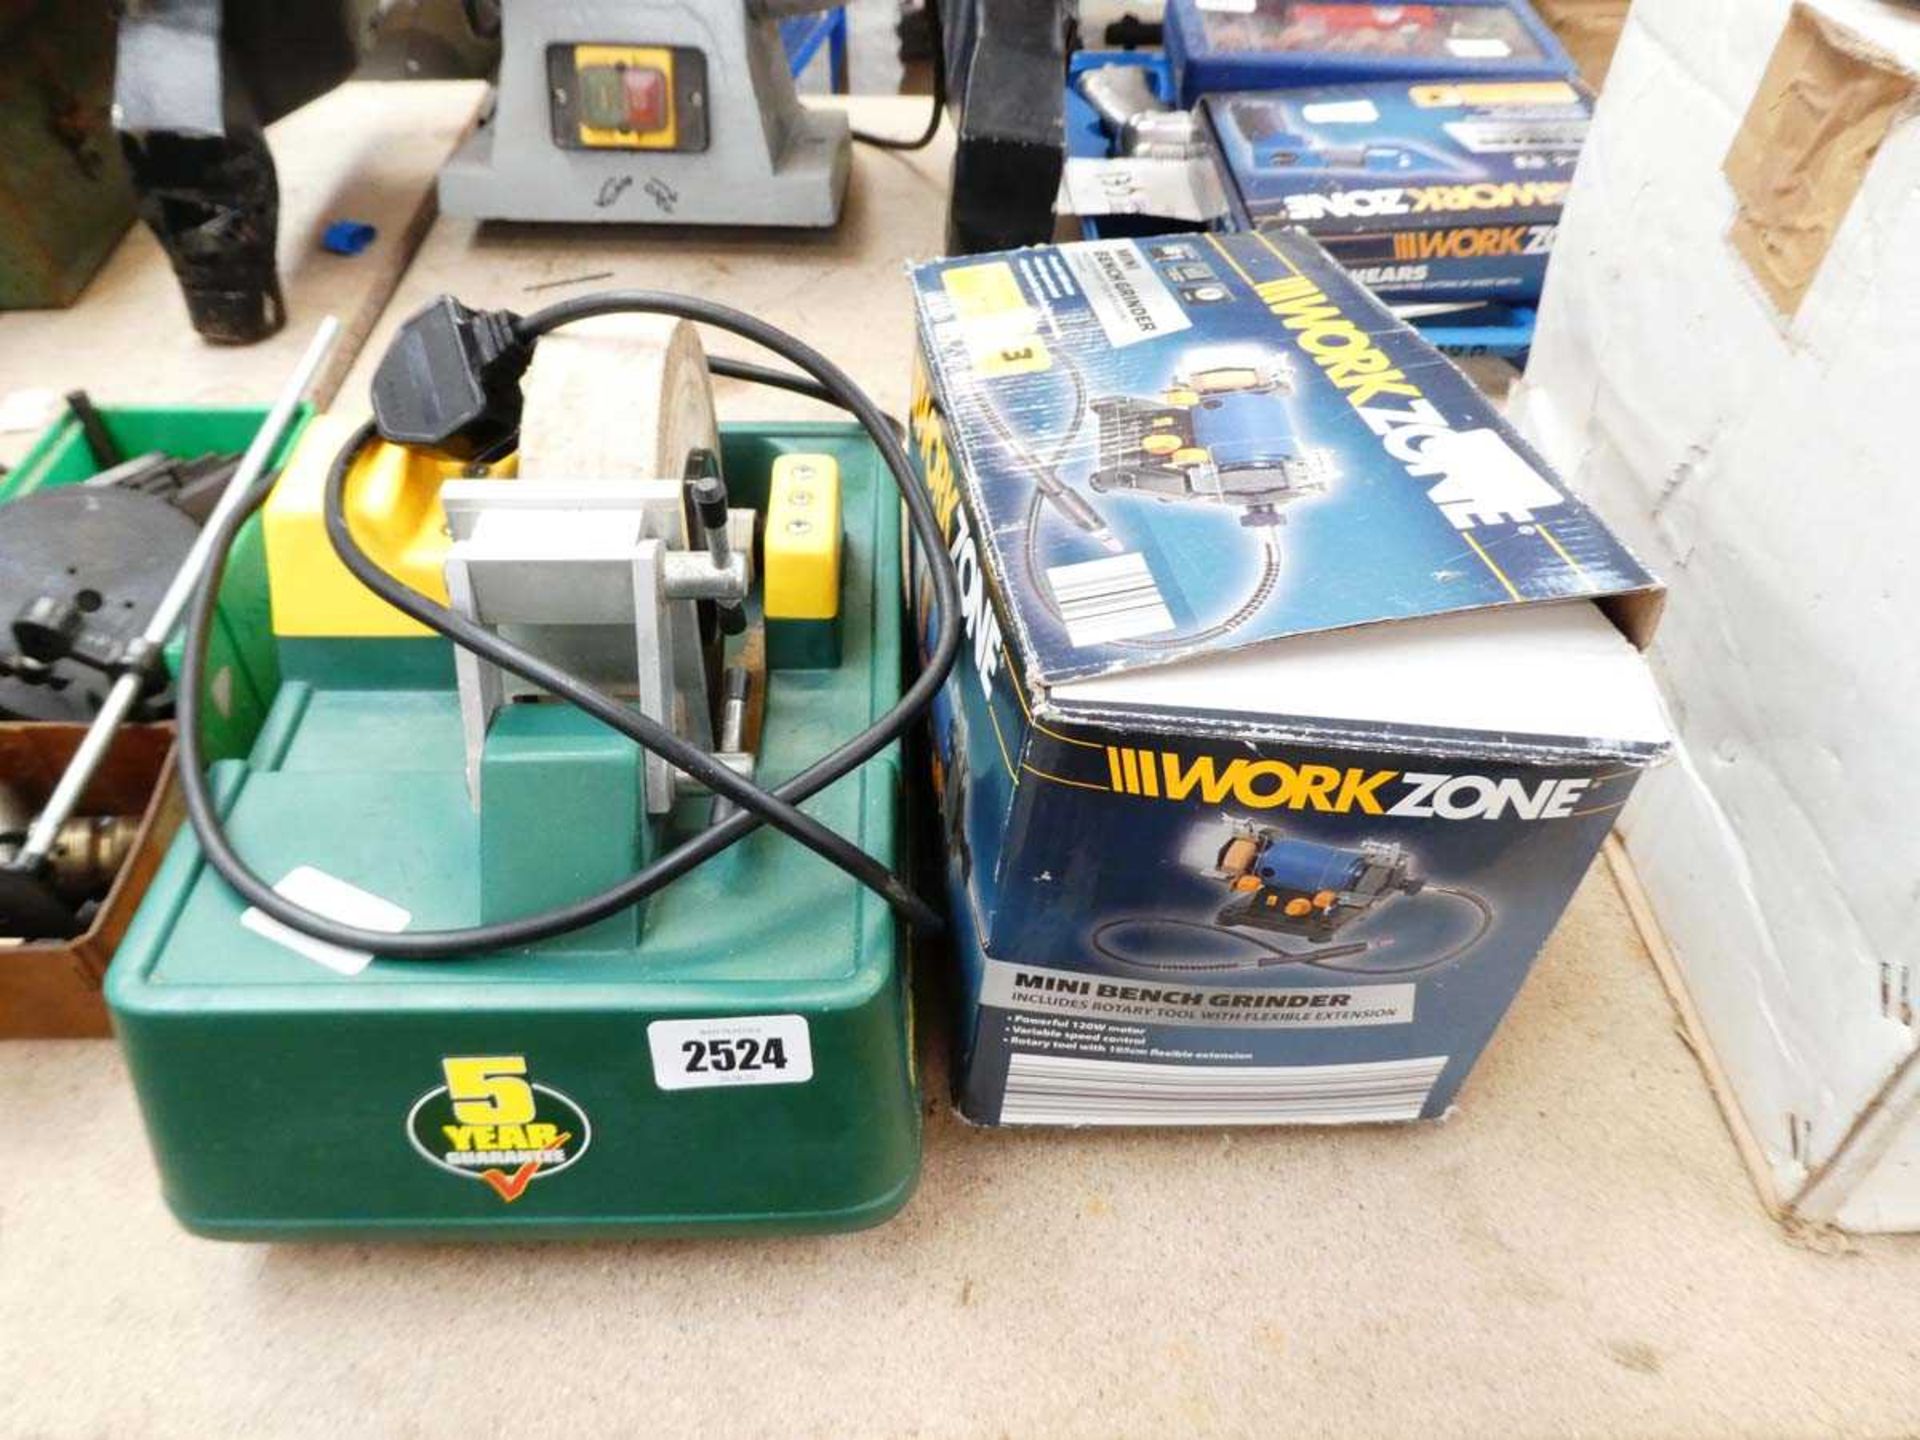 Boxed Workzone mini bench grinder with electric tool sharpener